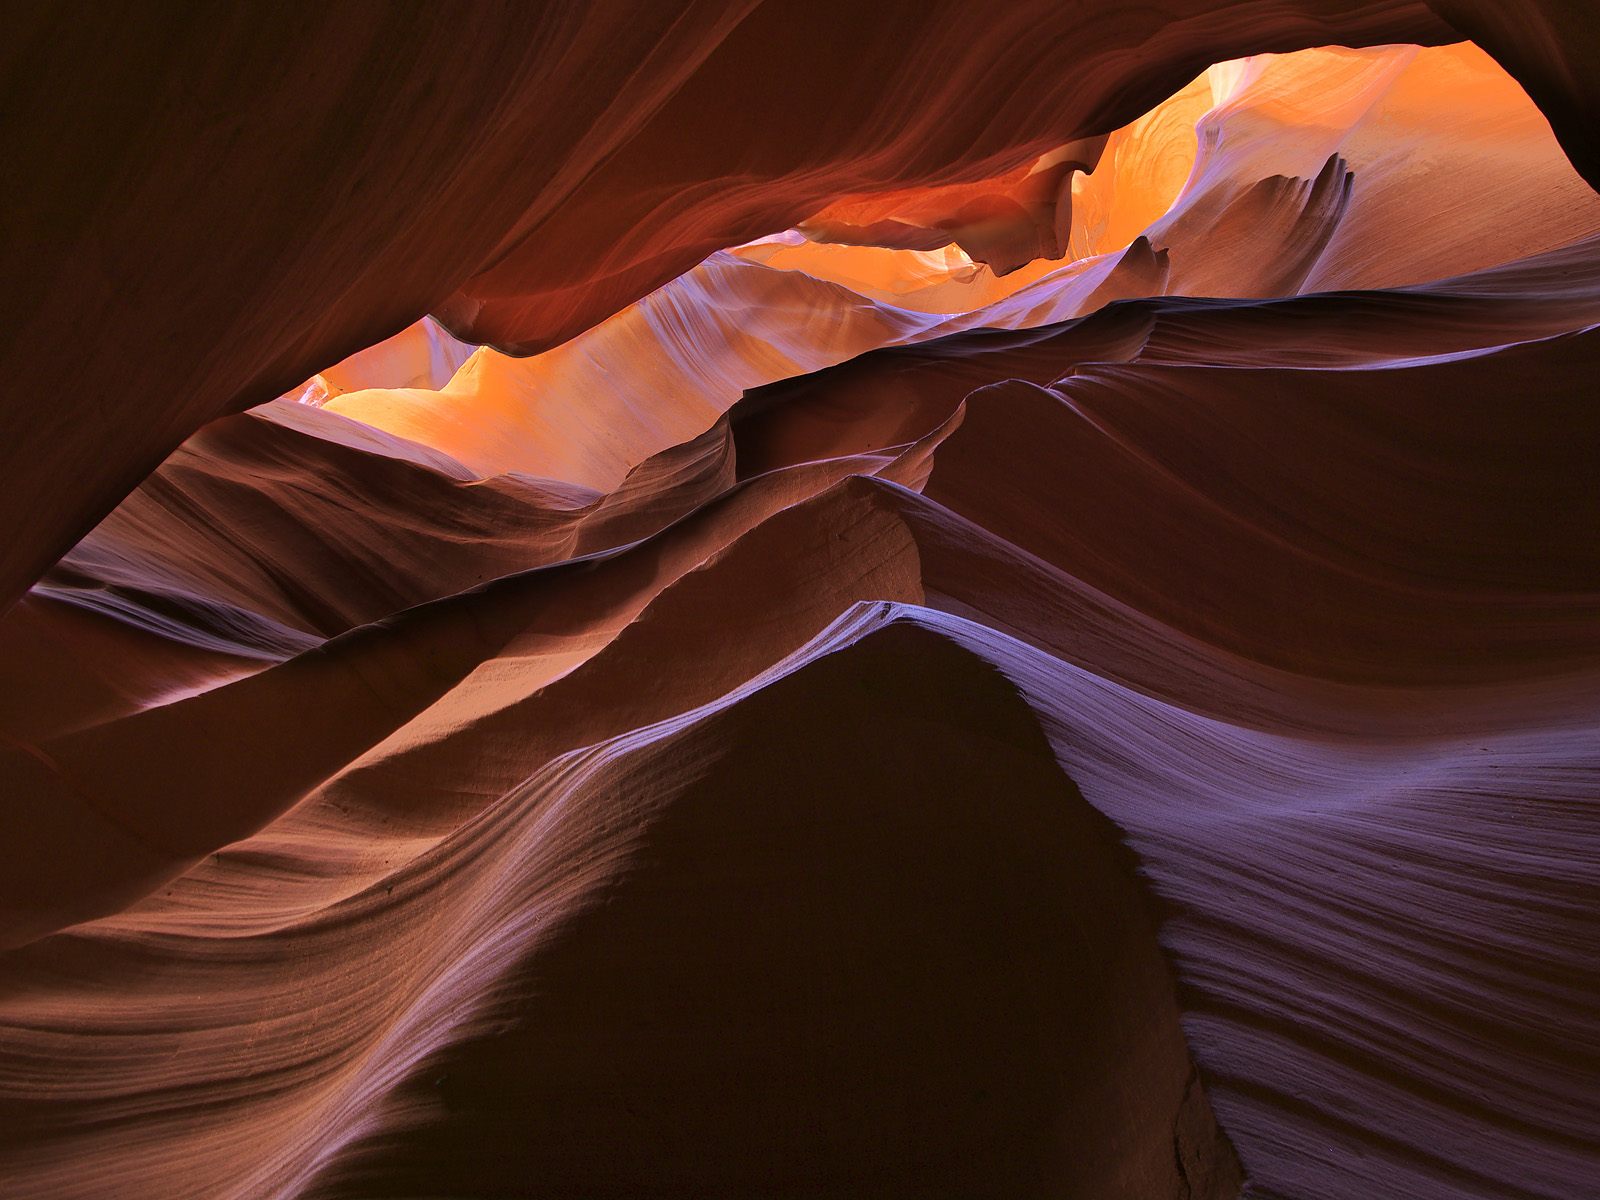 earth, antelope canyon, canyons wallpaper for mobile